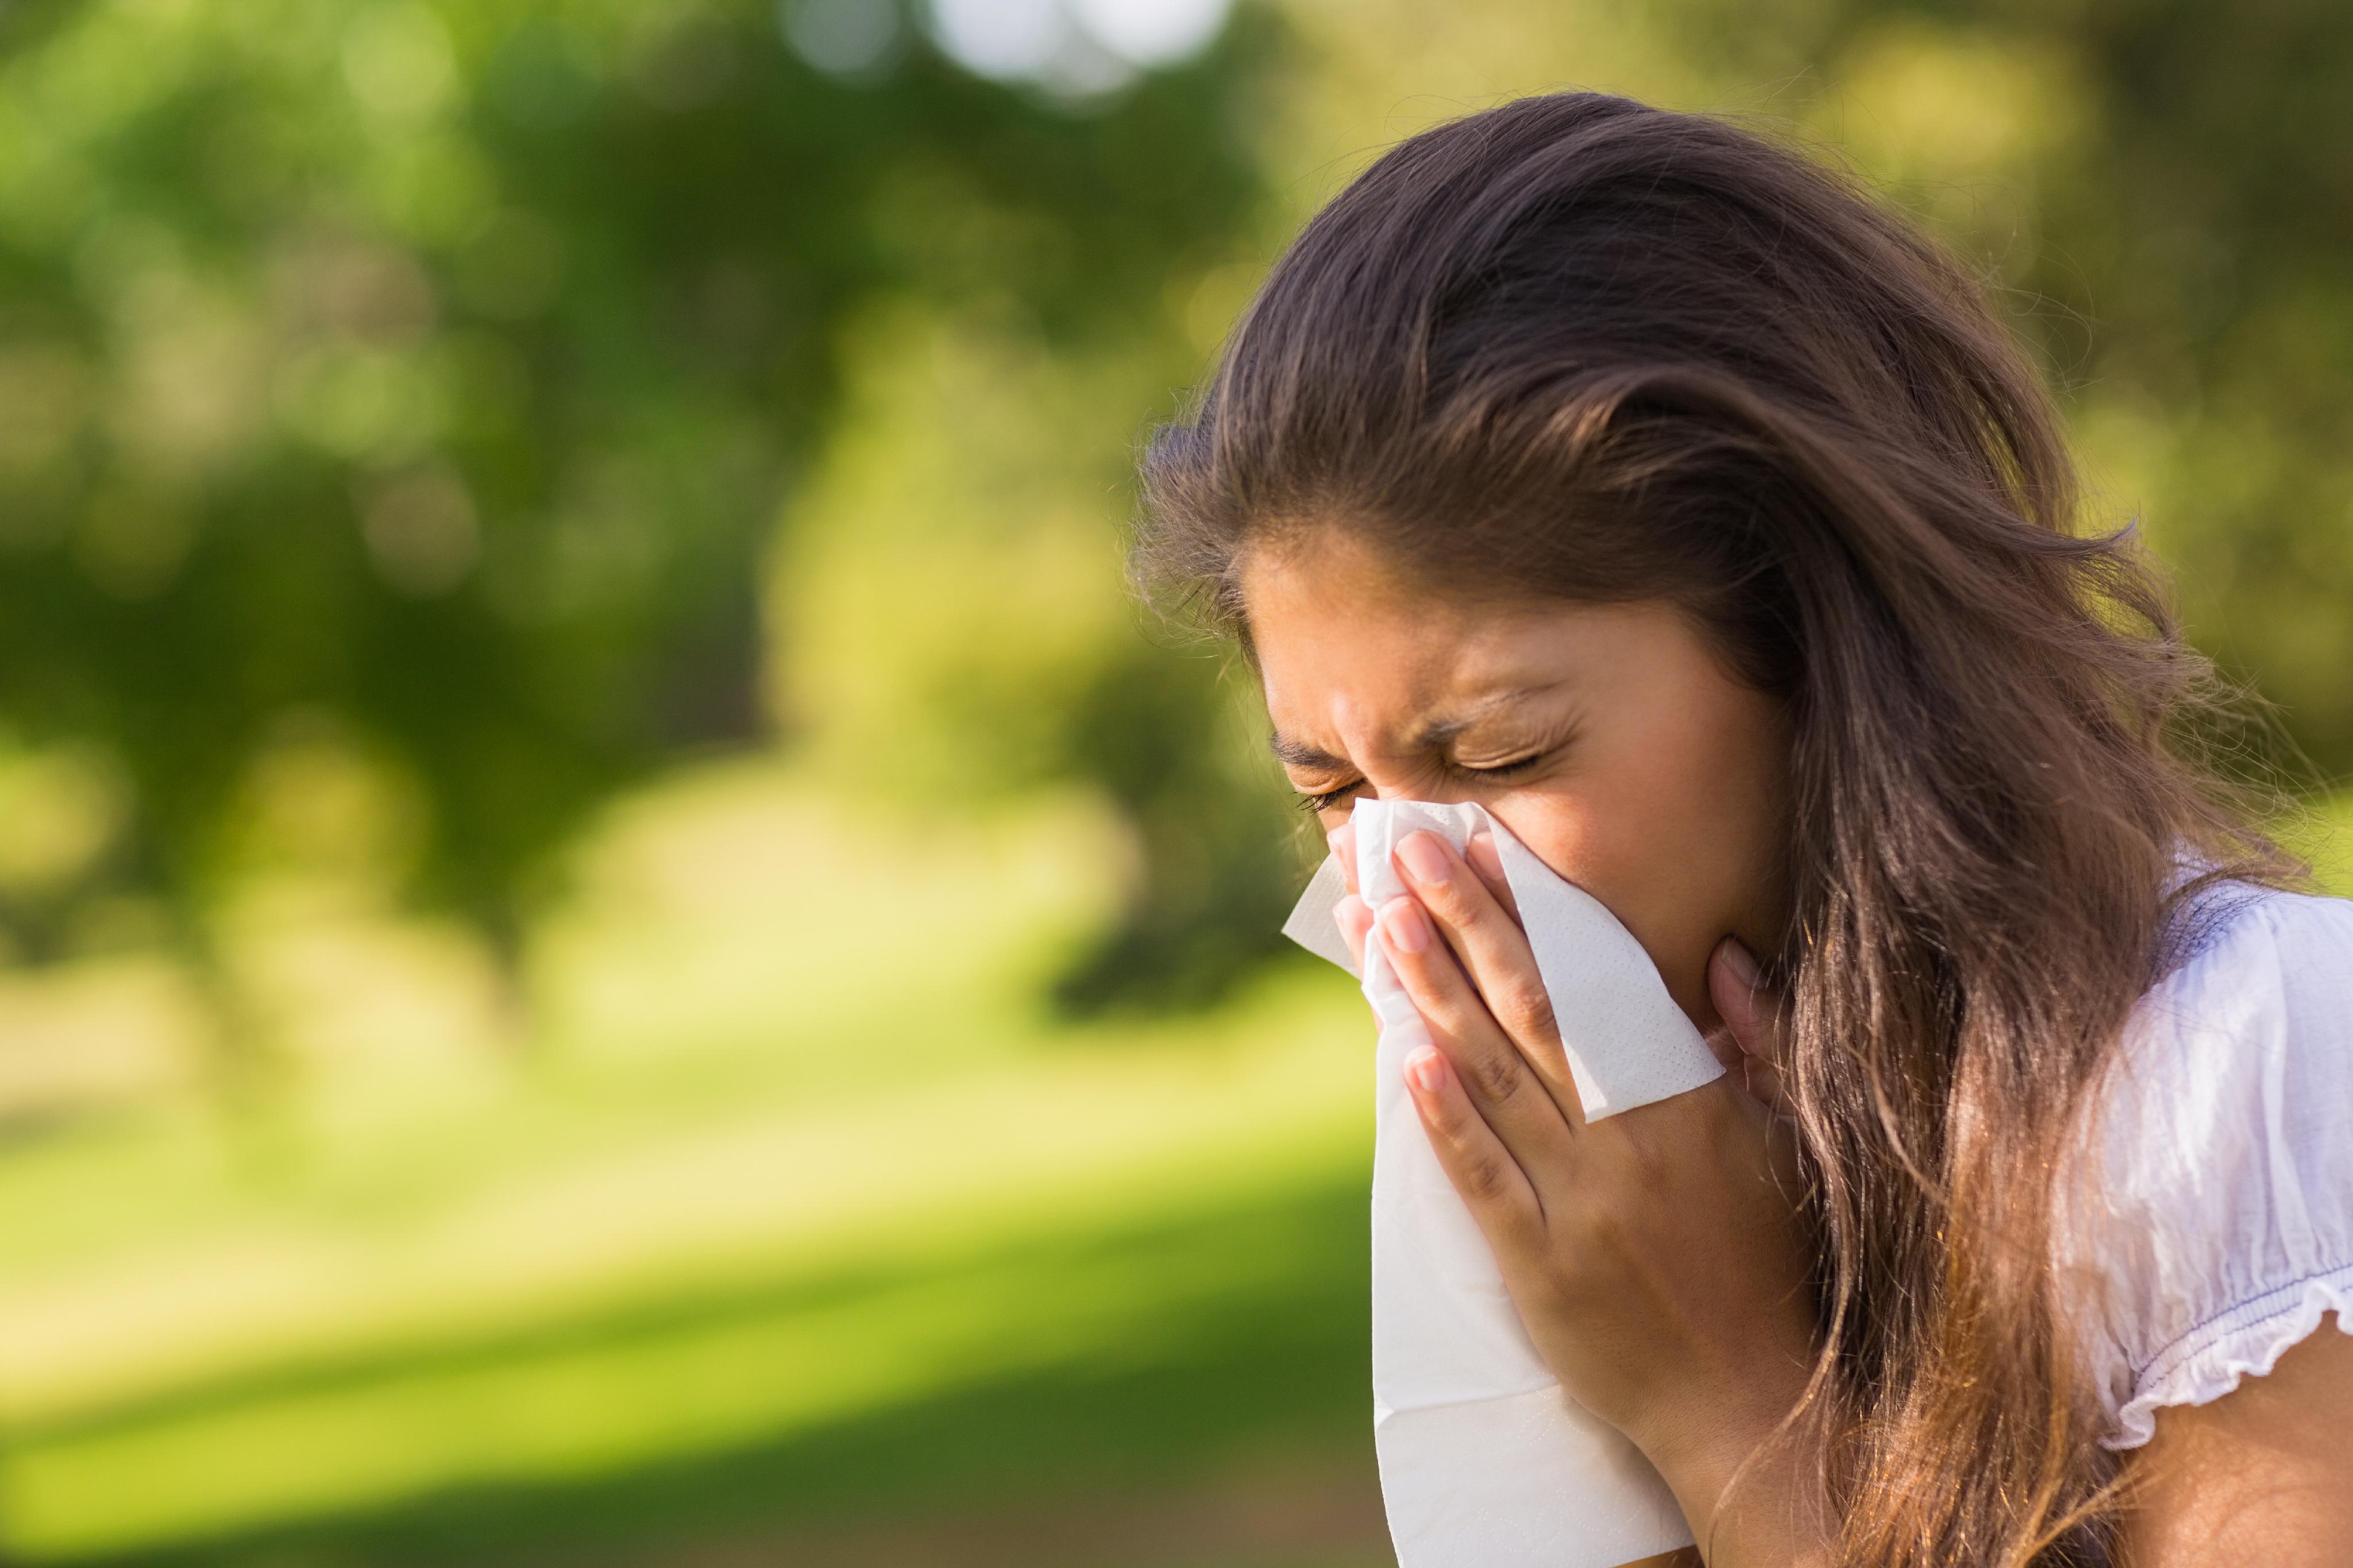 What are the Symptoms of Pollen Allergy and the Treatment for Pollen Allergy?